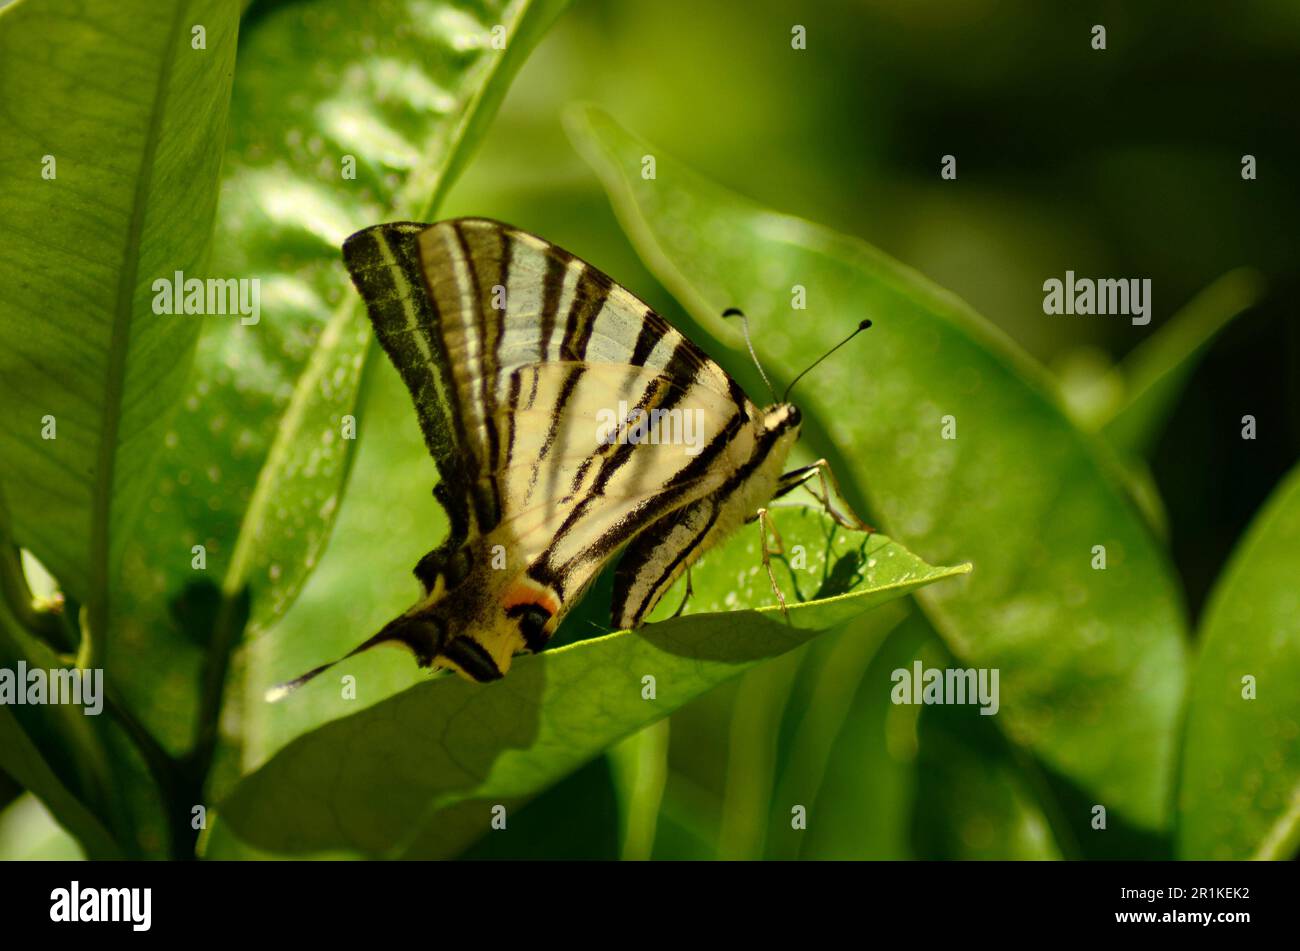 A black and white butterfly sits on a tree branch under the rays of the sun. The green leaves of the tree shine through in the sun. Stock Photo